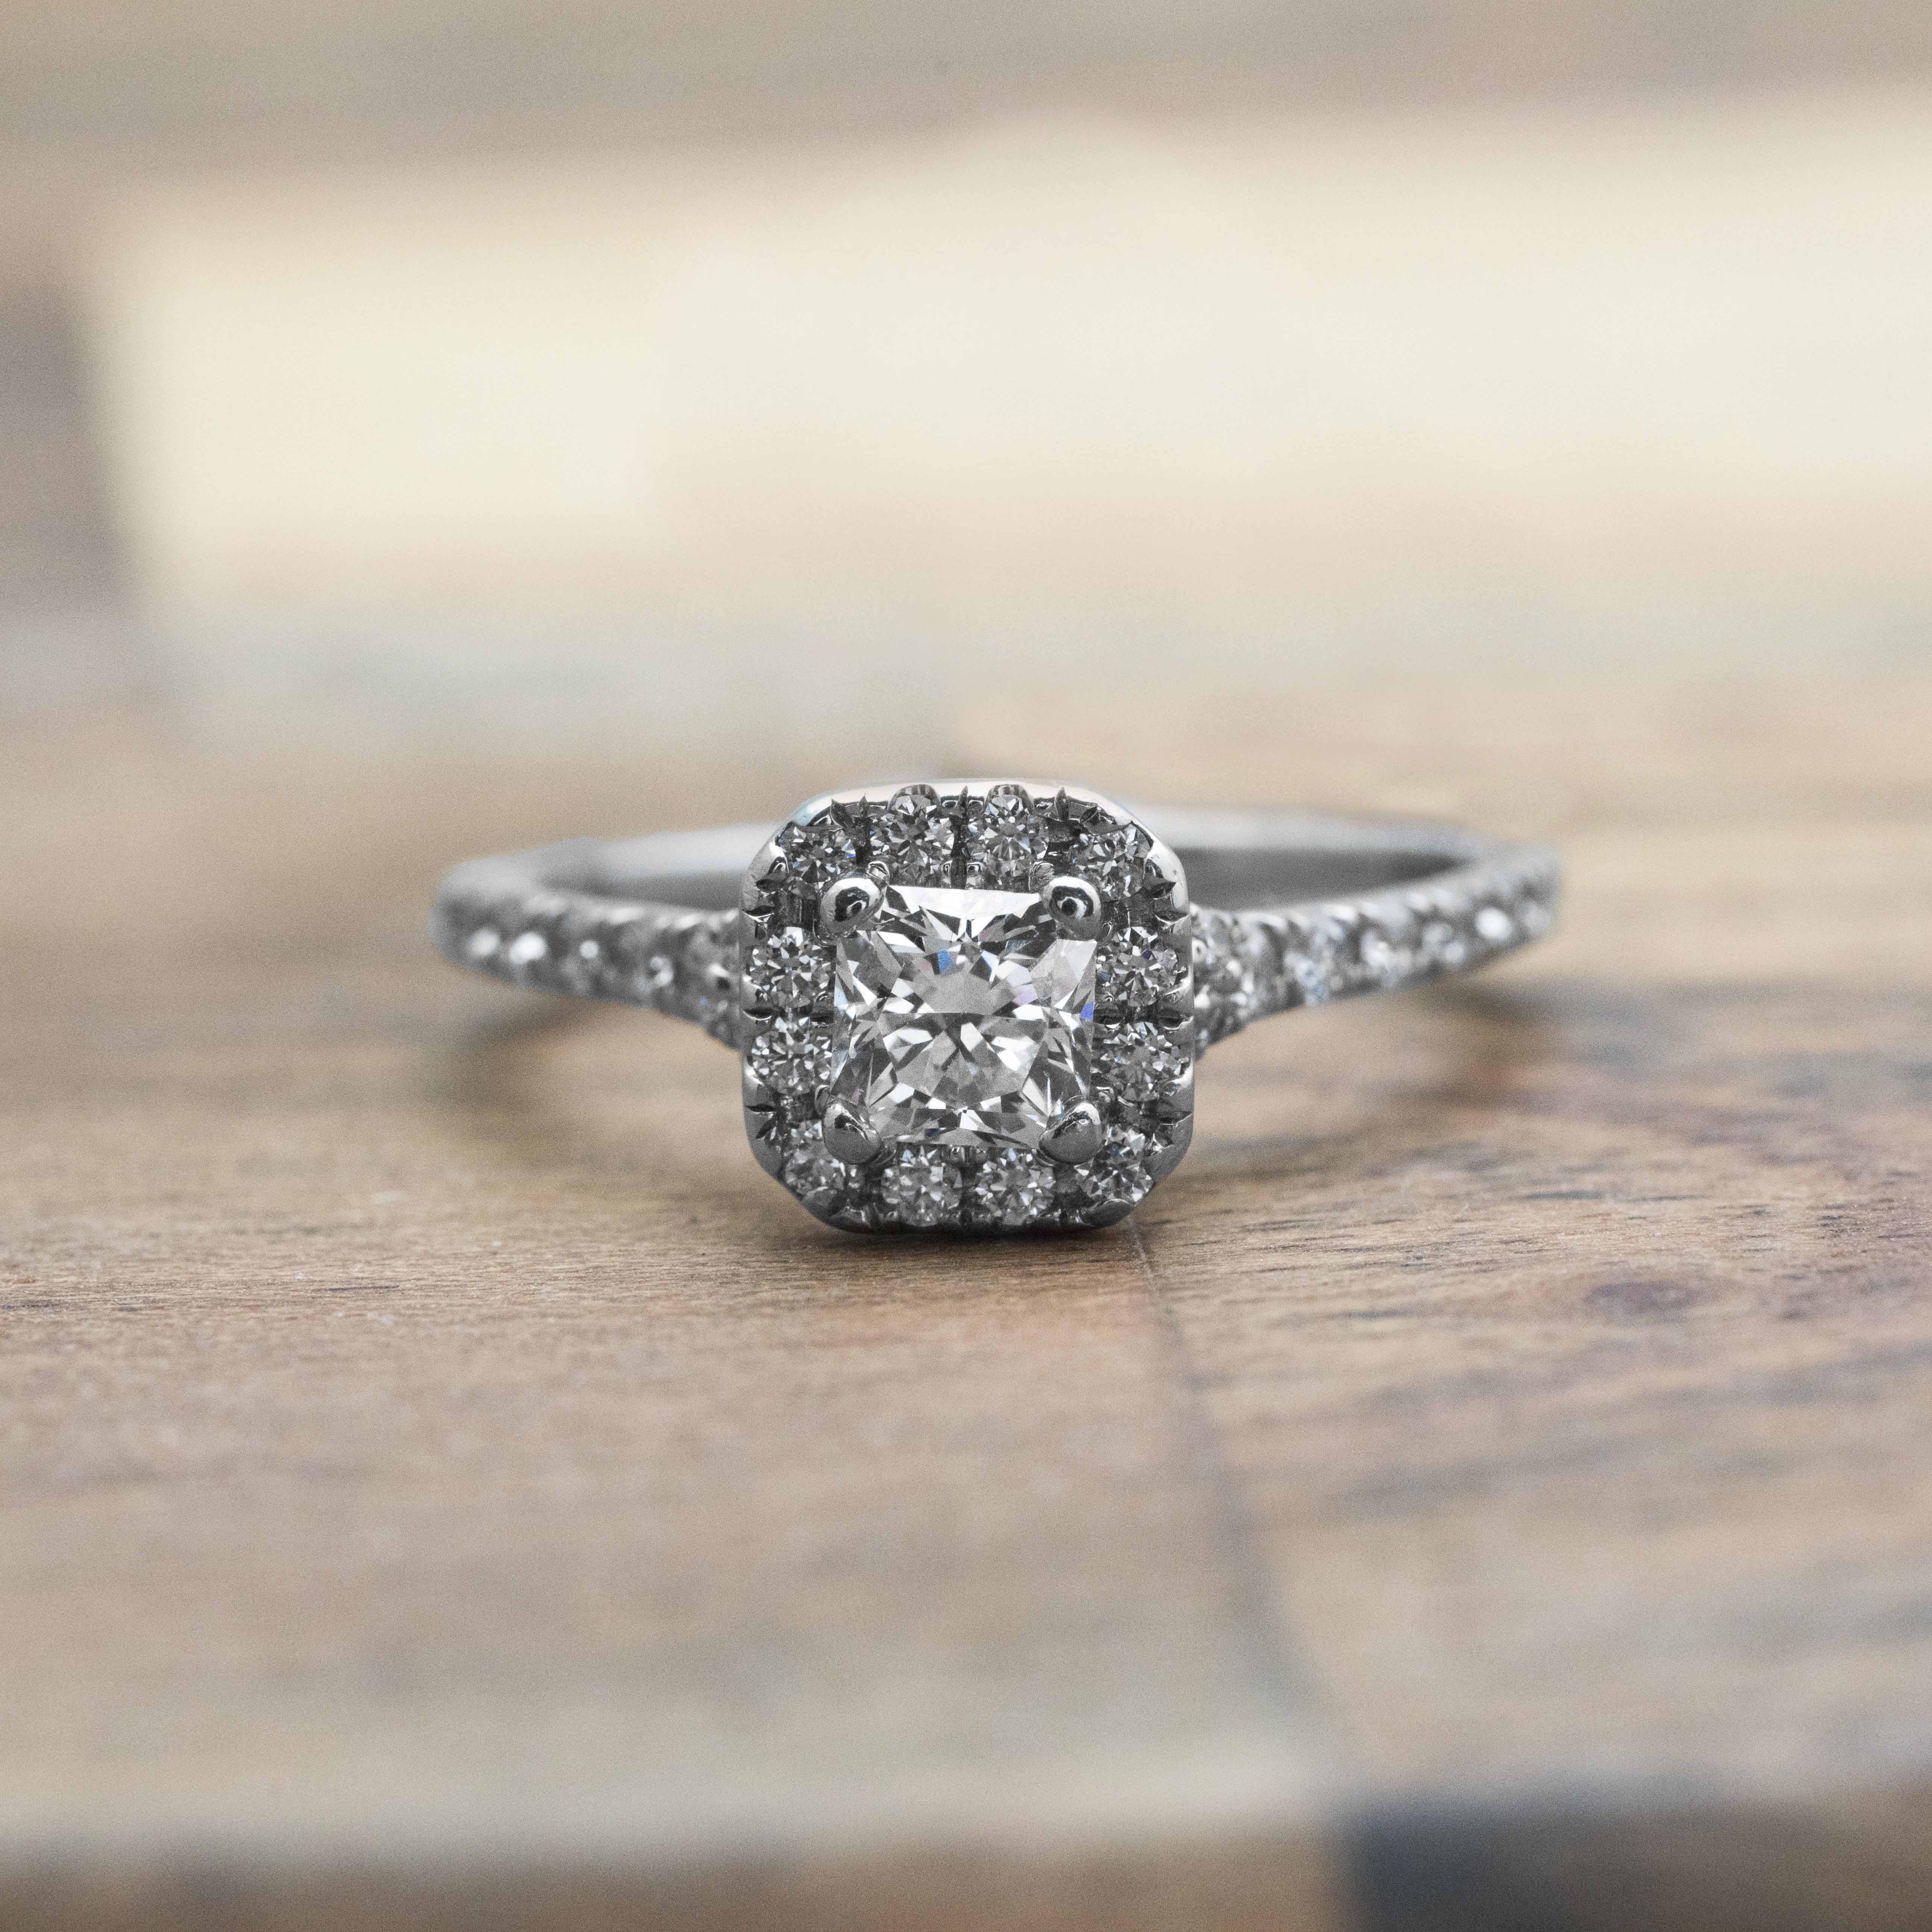 White gold diamond engagement ring with diamond halo and diamonds in the band.